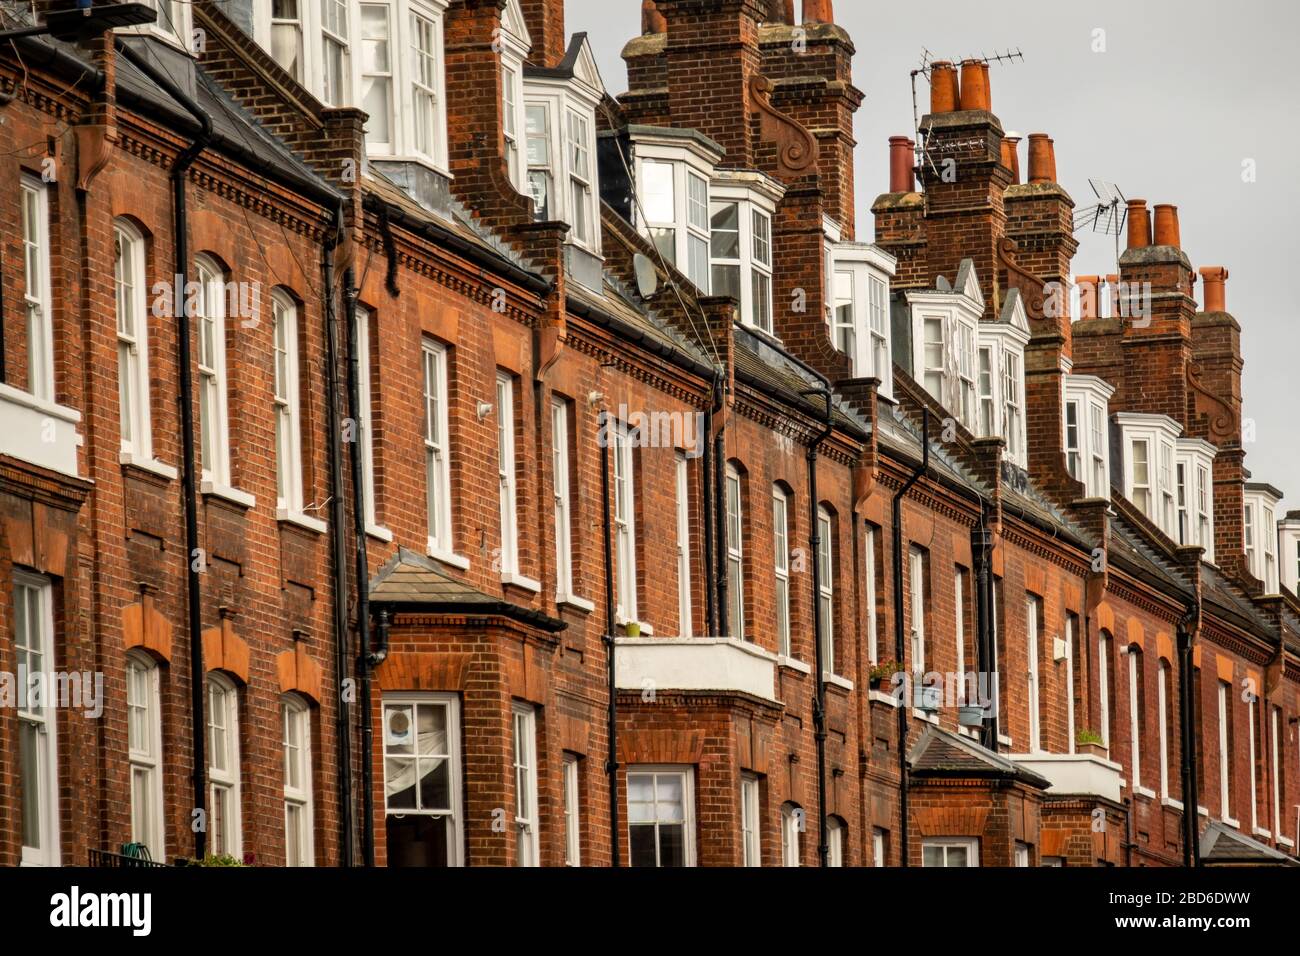 Street of typical terraced houses - London UK Stock Photo